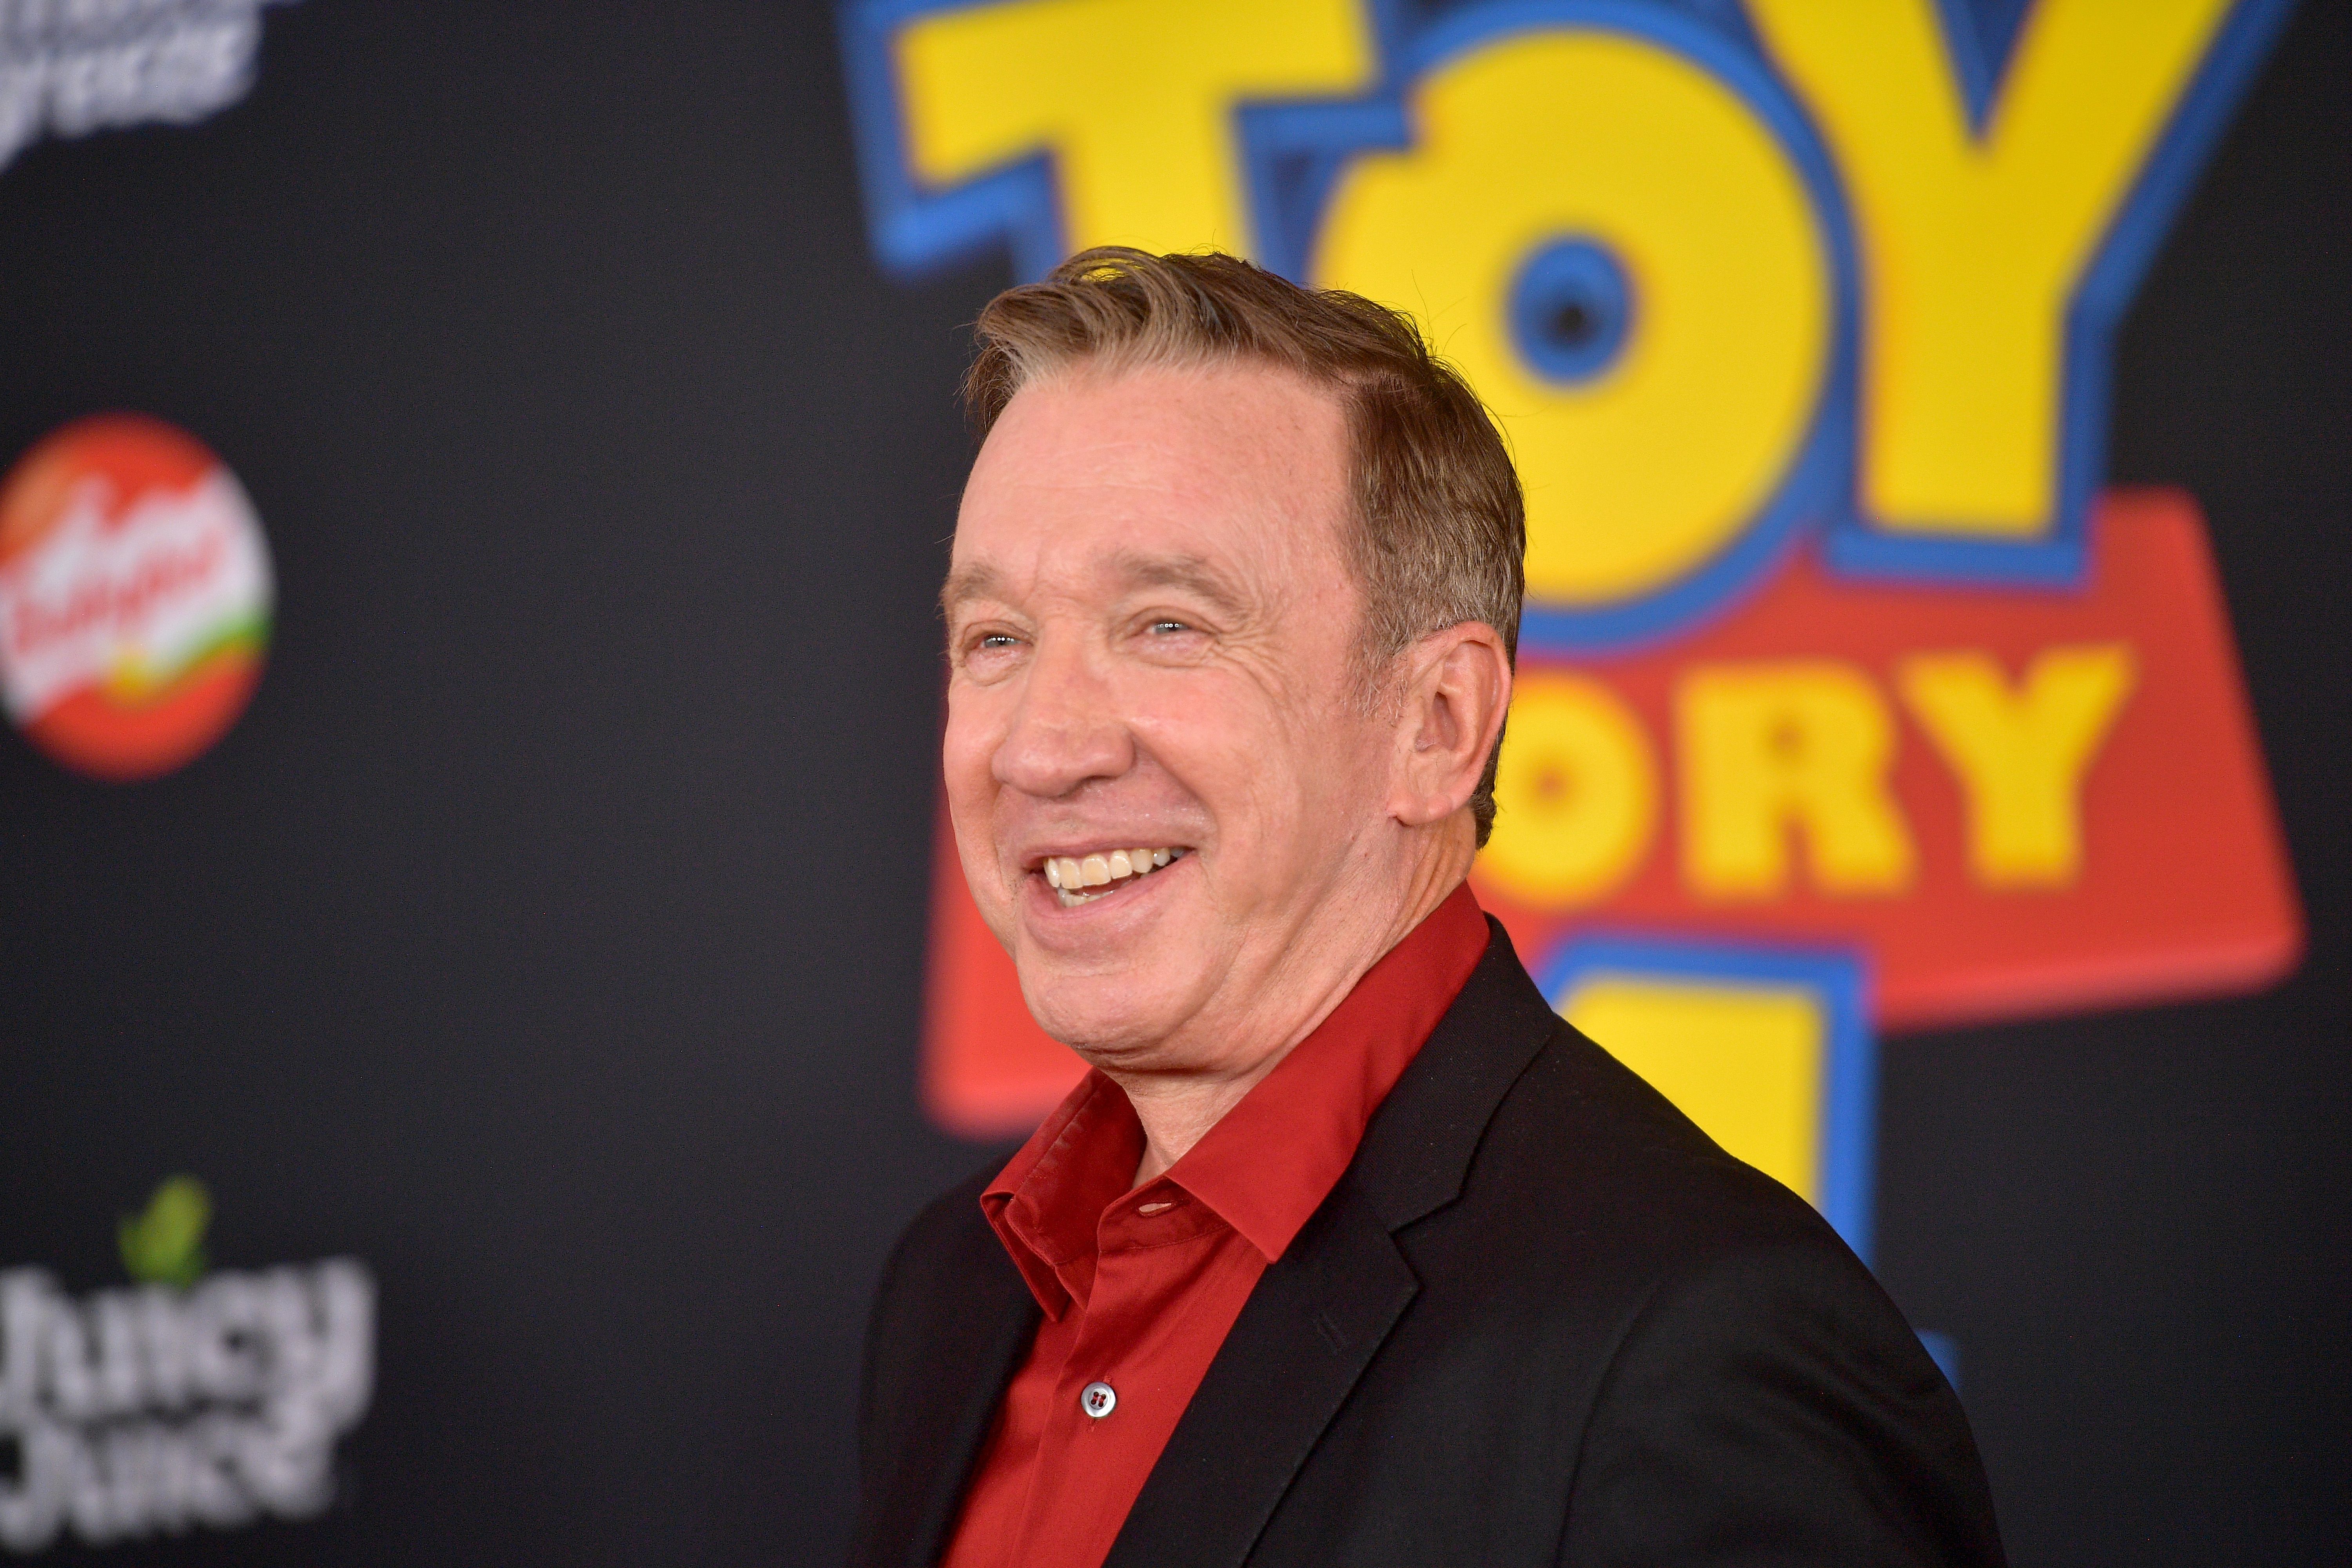 Tim Allen at the premiere of Disney and Pixar's "Toy Story 4" on June 11, 2019 | Photo: Getty Images